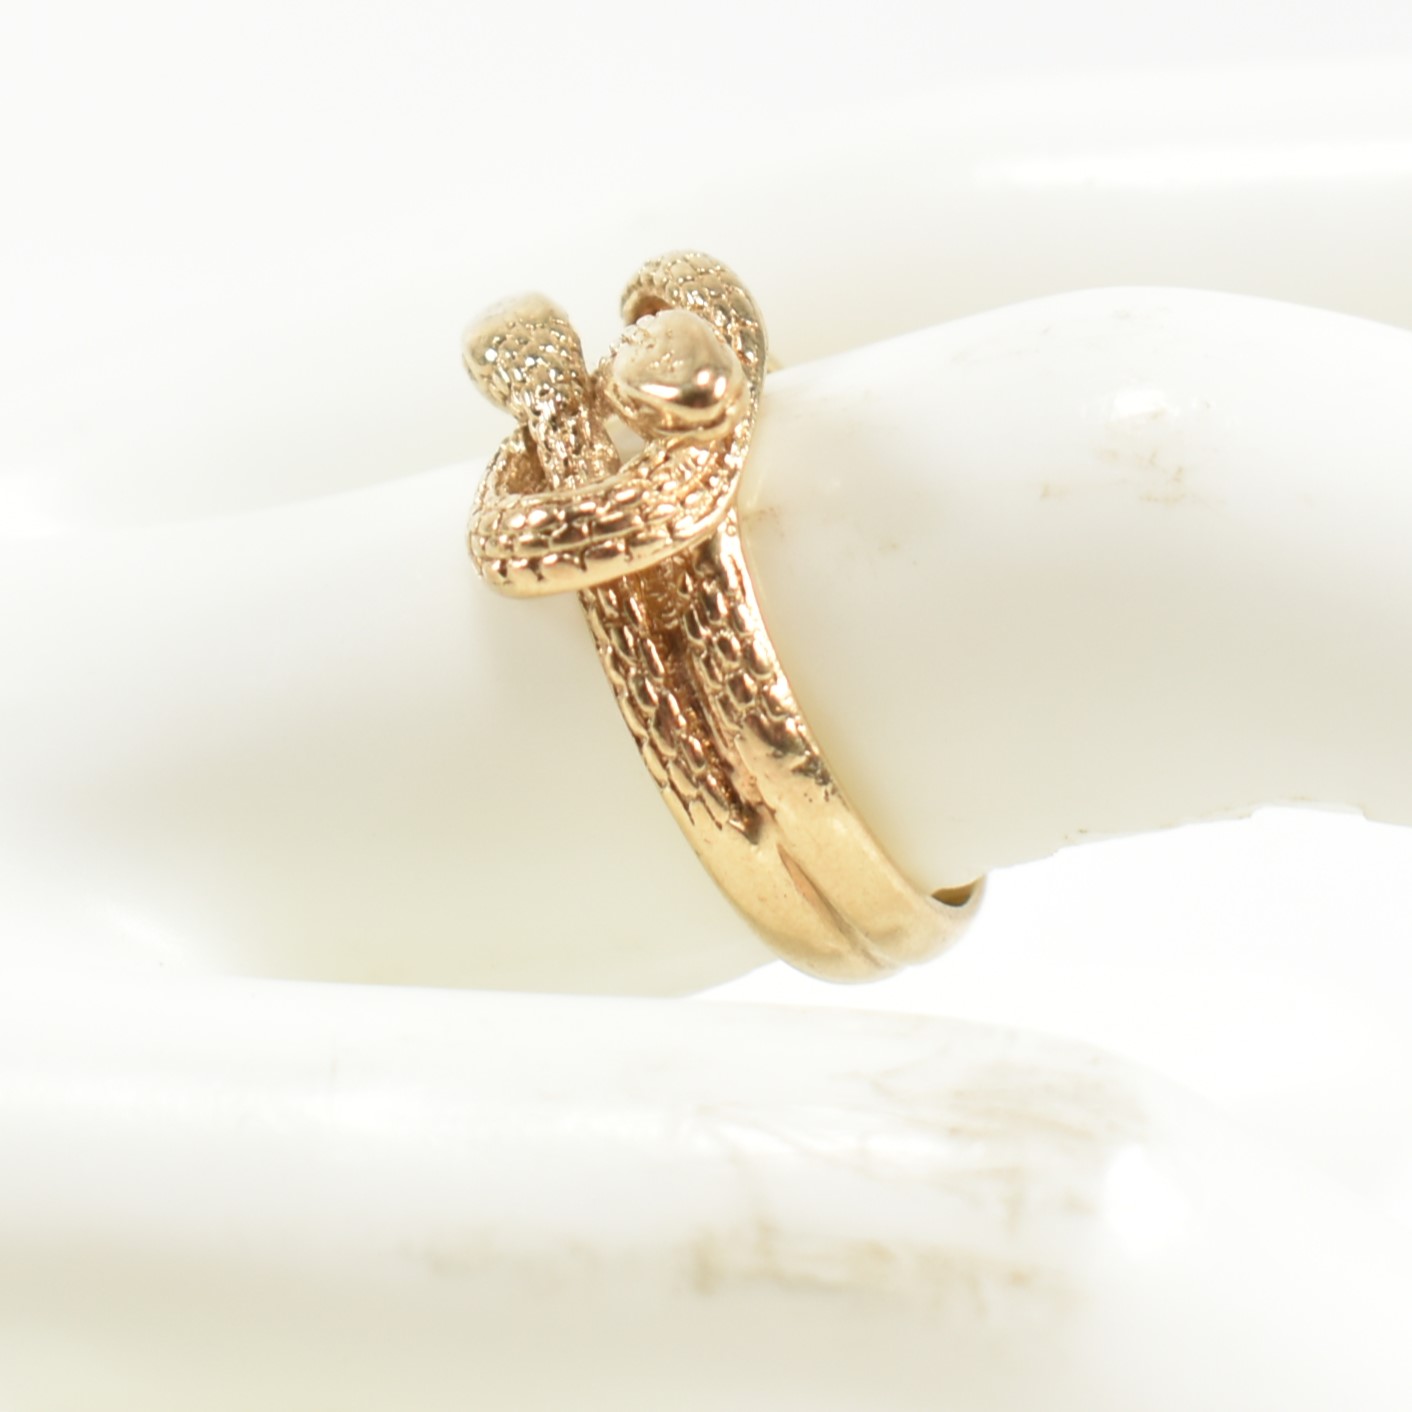 HALLMARKED 9CT GOLD ENTWINED SNAKE RING - Image 9 of 9